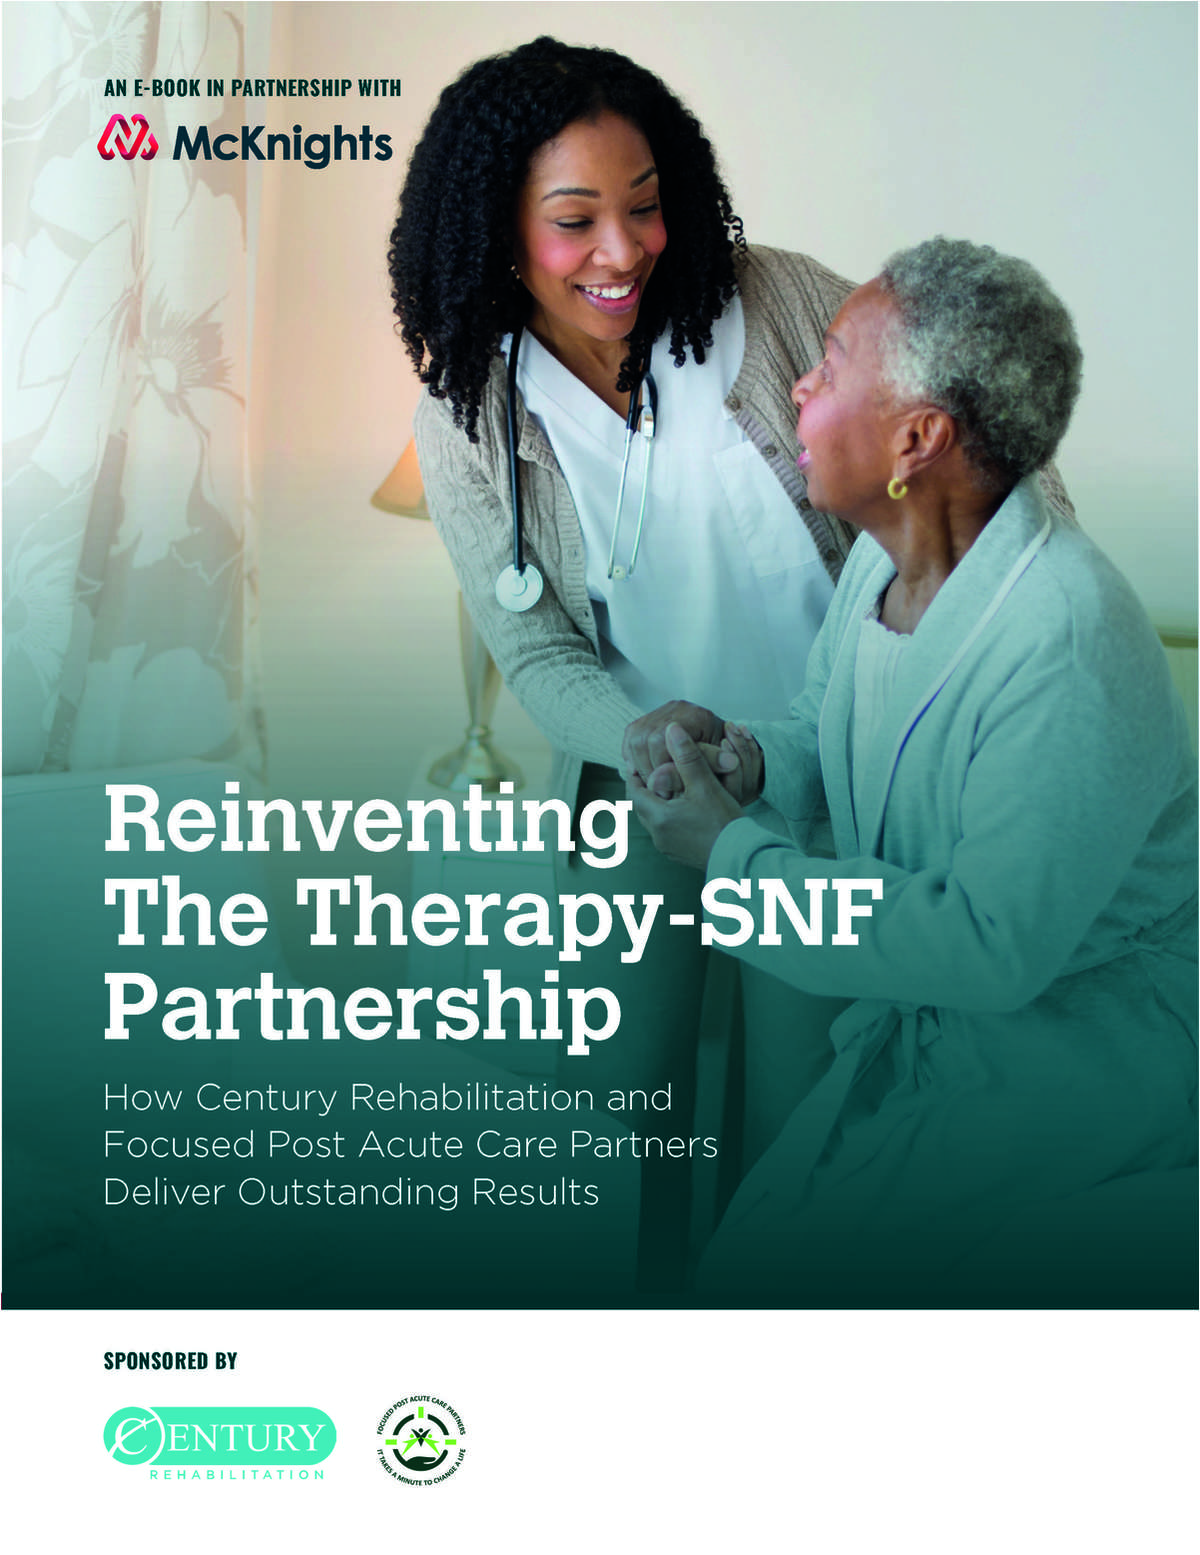 Reinventing the Therapy-SNF Partnership Delivers 28% Therapy Margin Growth in Year 1!